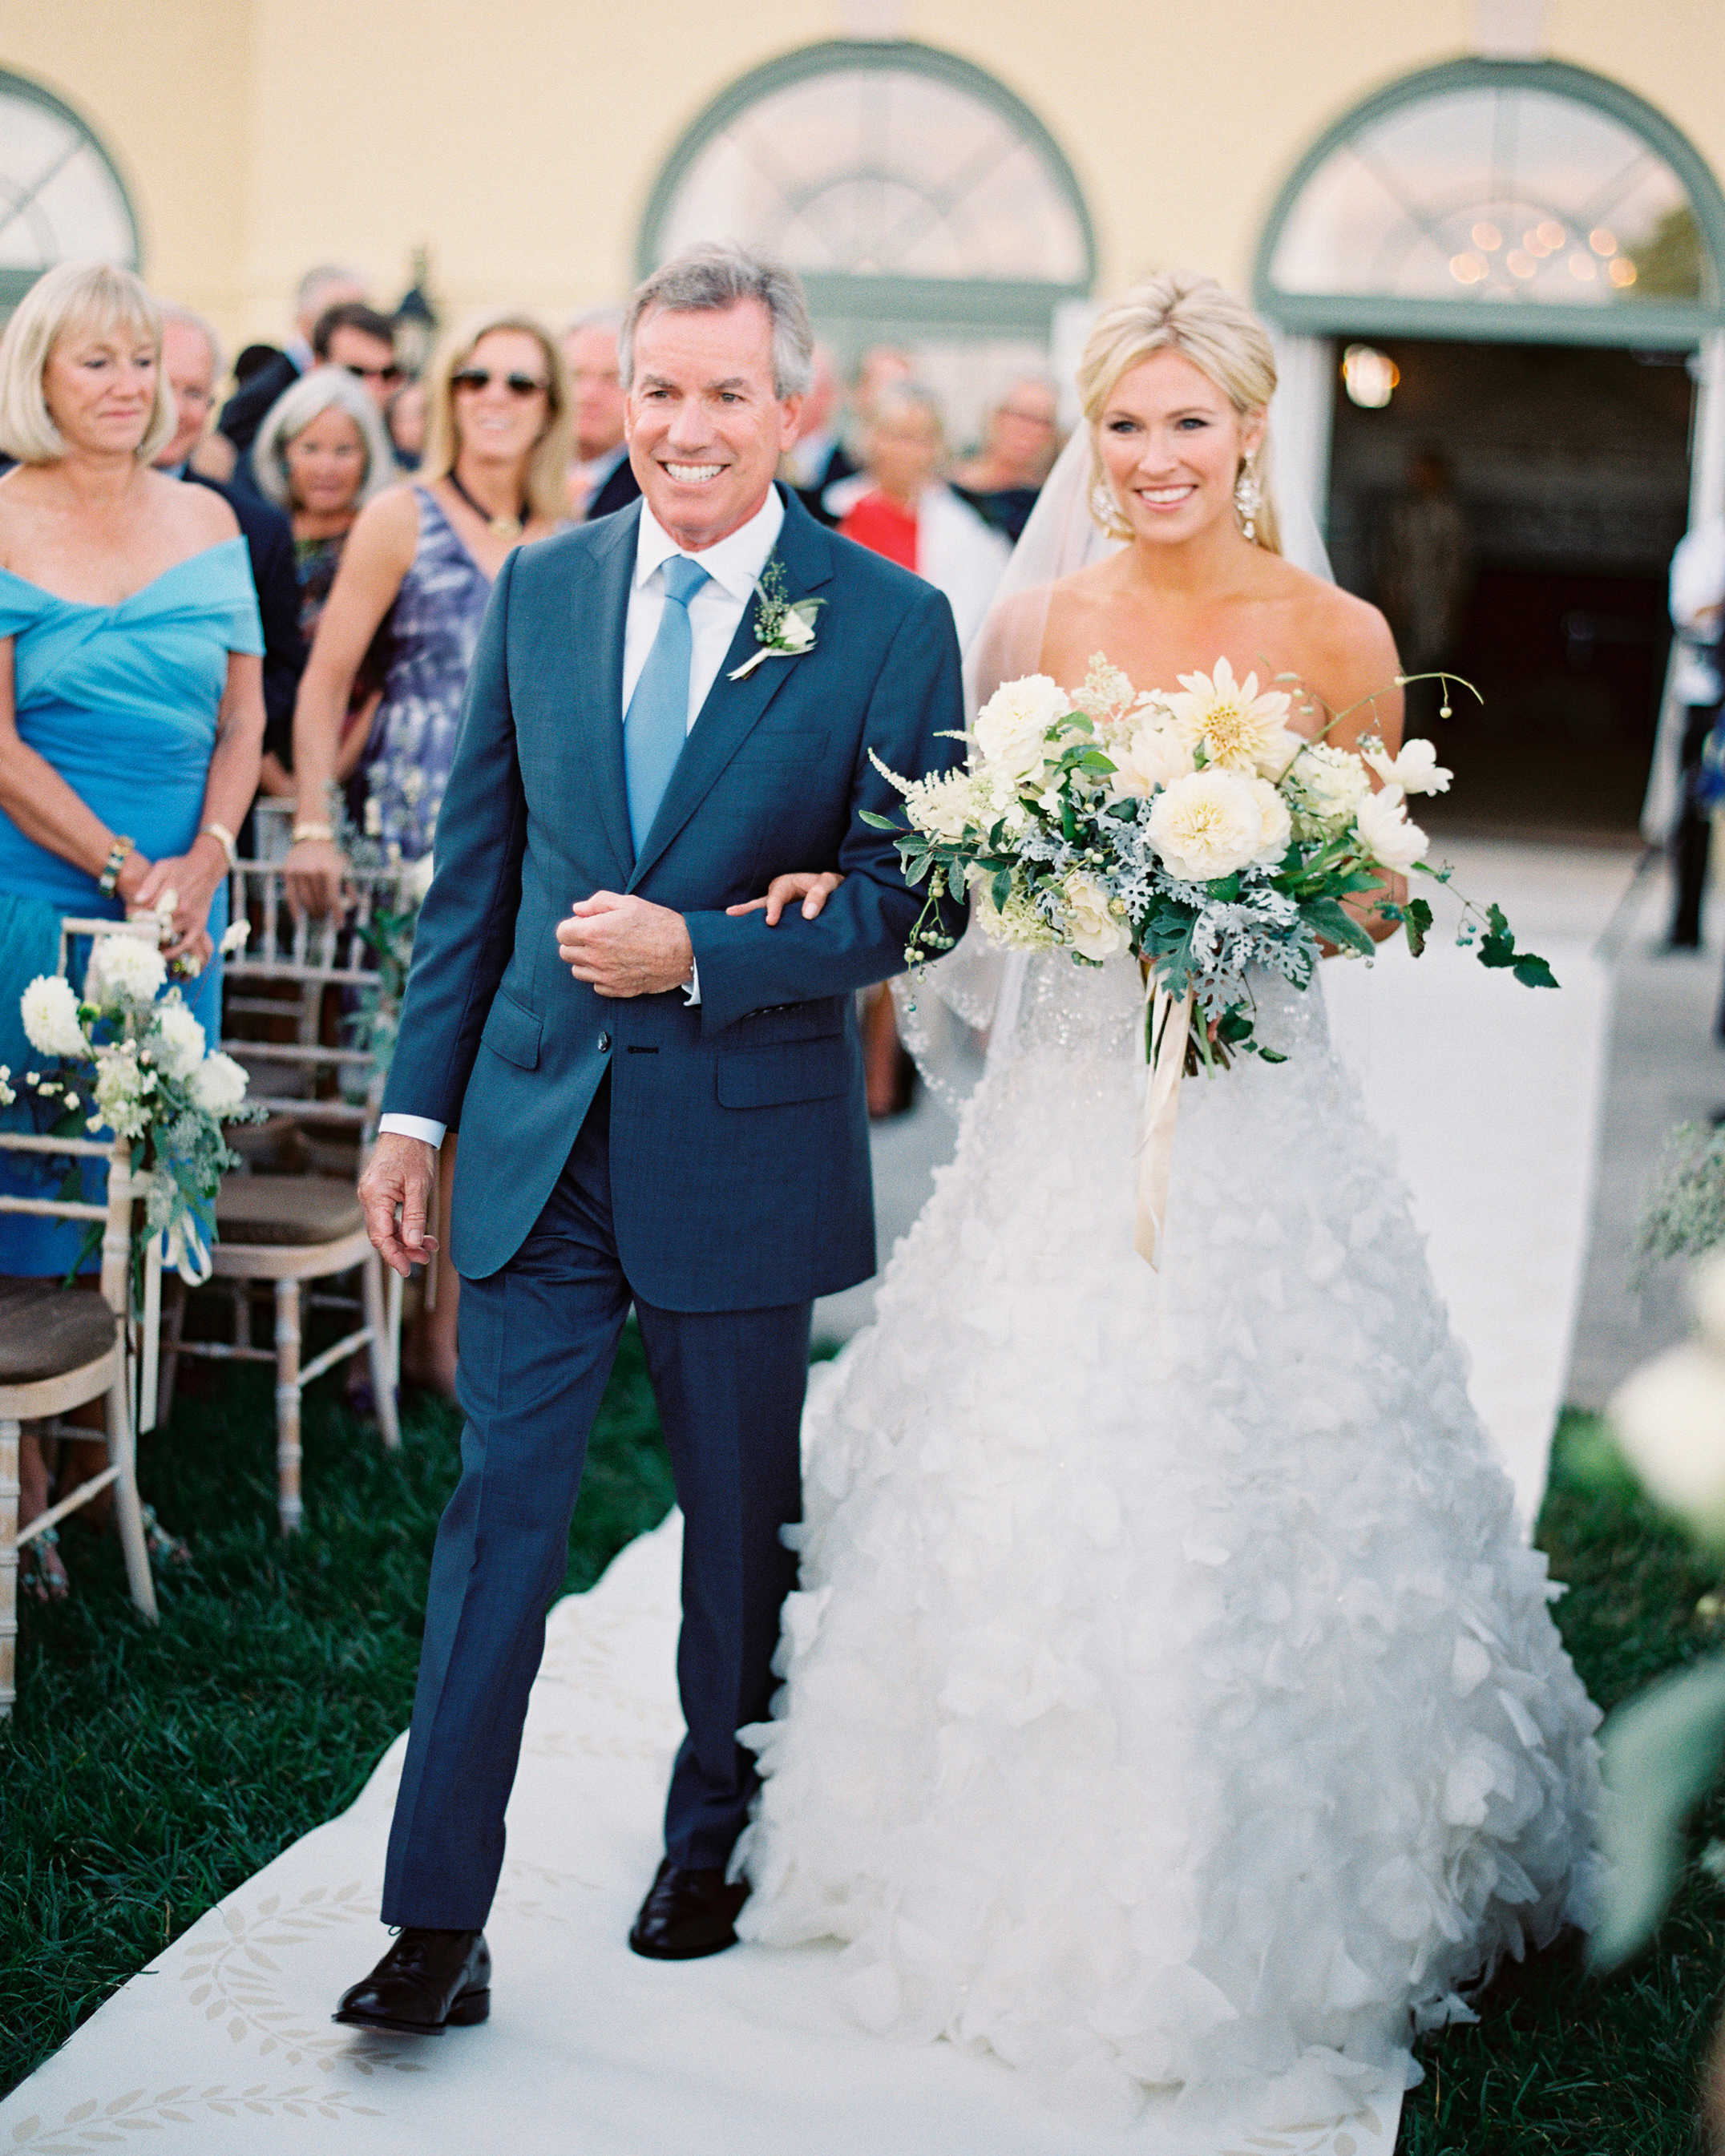 A Romantic Cream-And-Ivory Wedding at a Historic Virginia Hotel ...